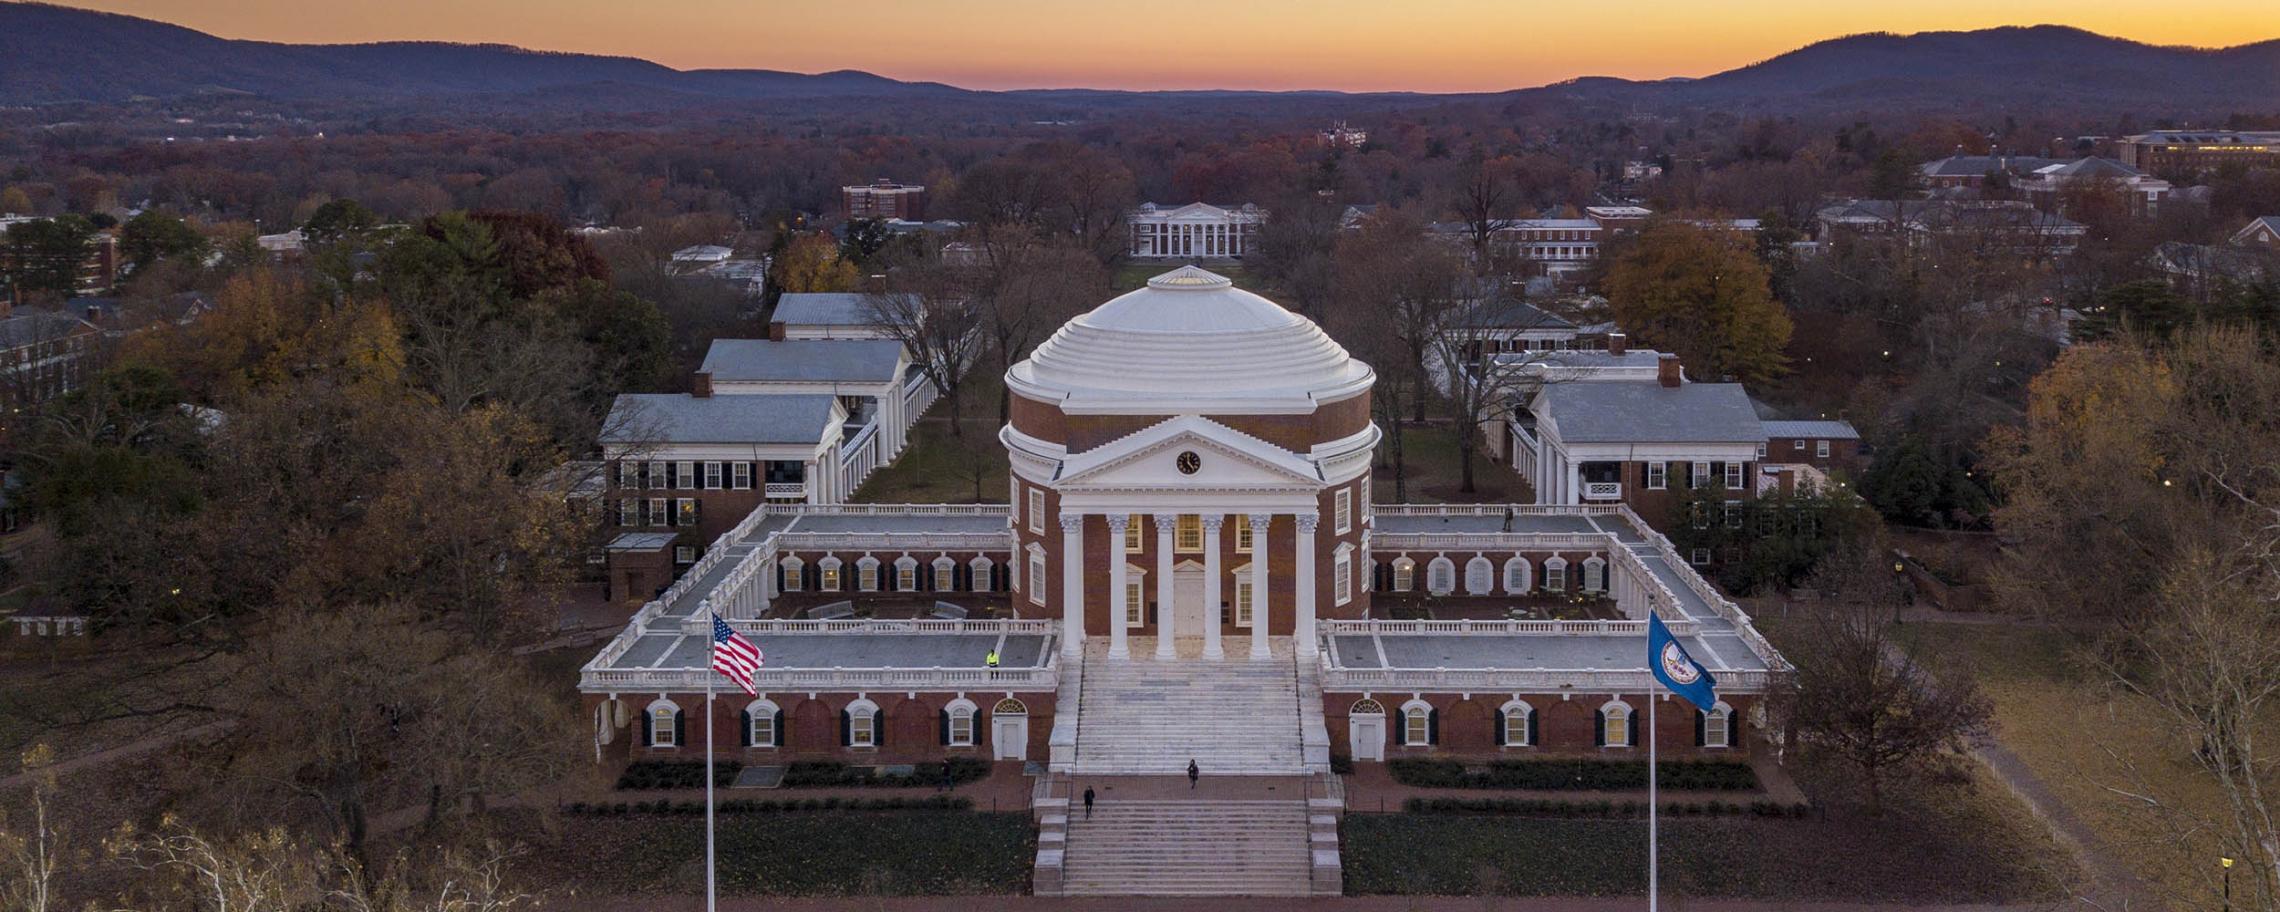 Take a Look Back at Some of 2017’s Most Powerful UVA Images UVA Today